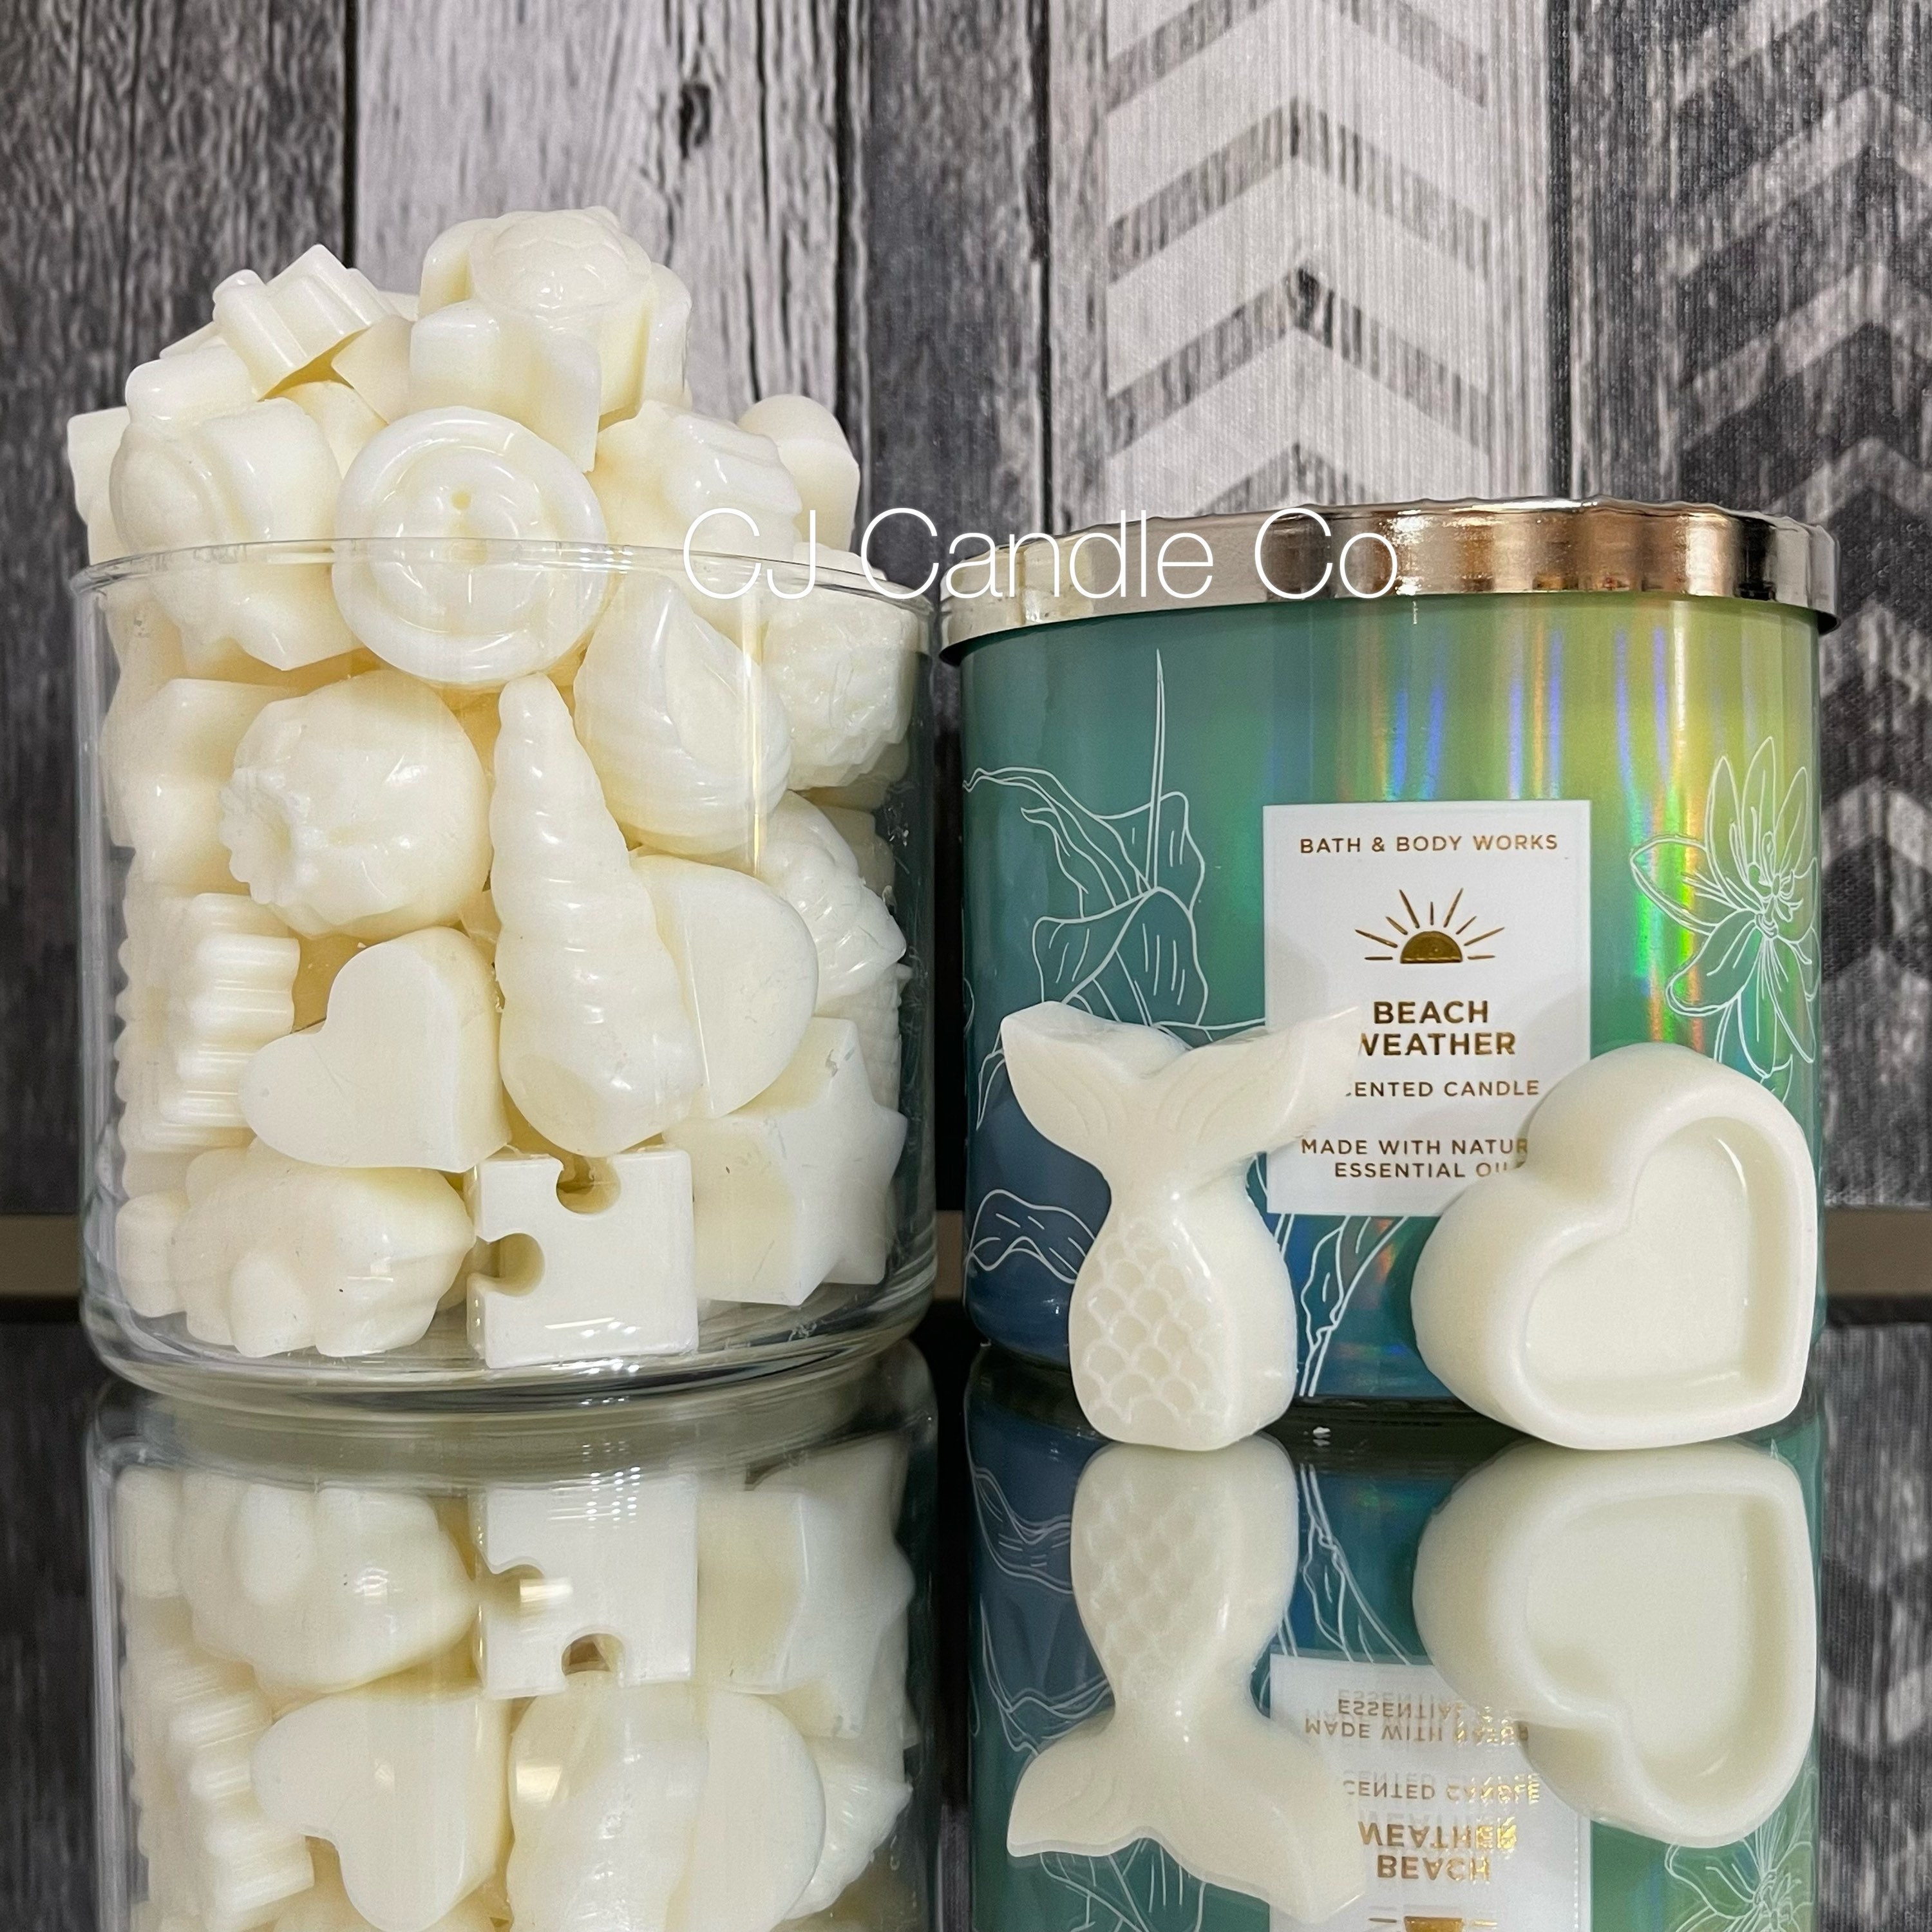 Yankee Candle Wax Melts, Coconut Beach, Fragranced, Search